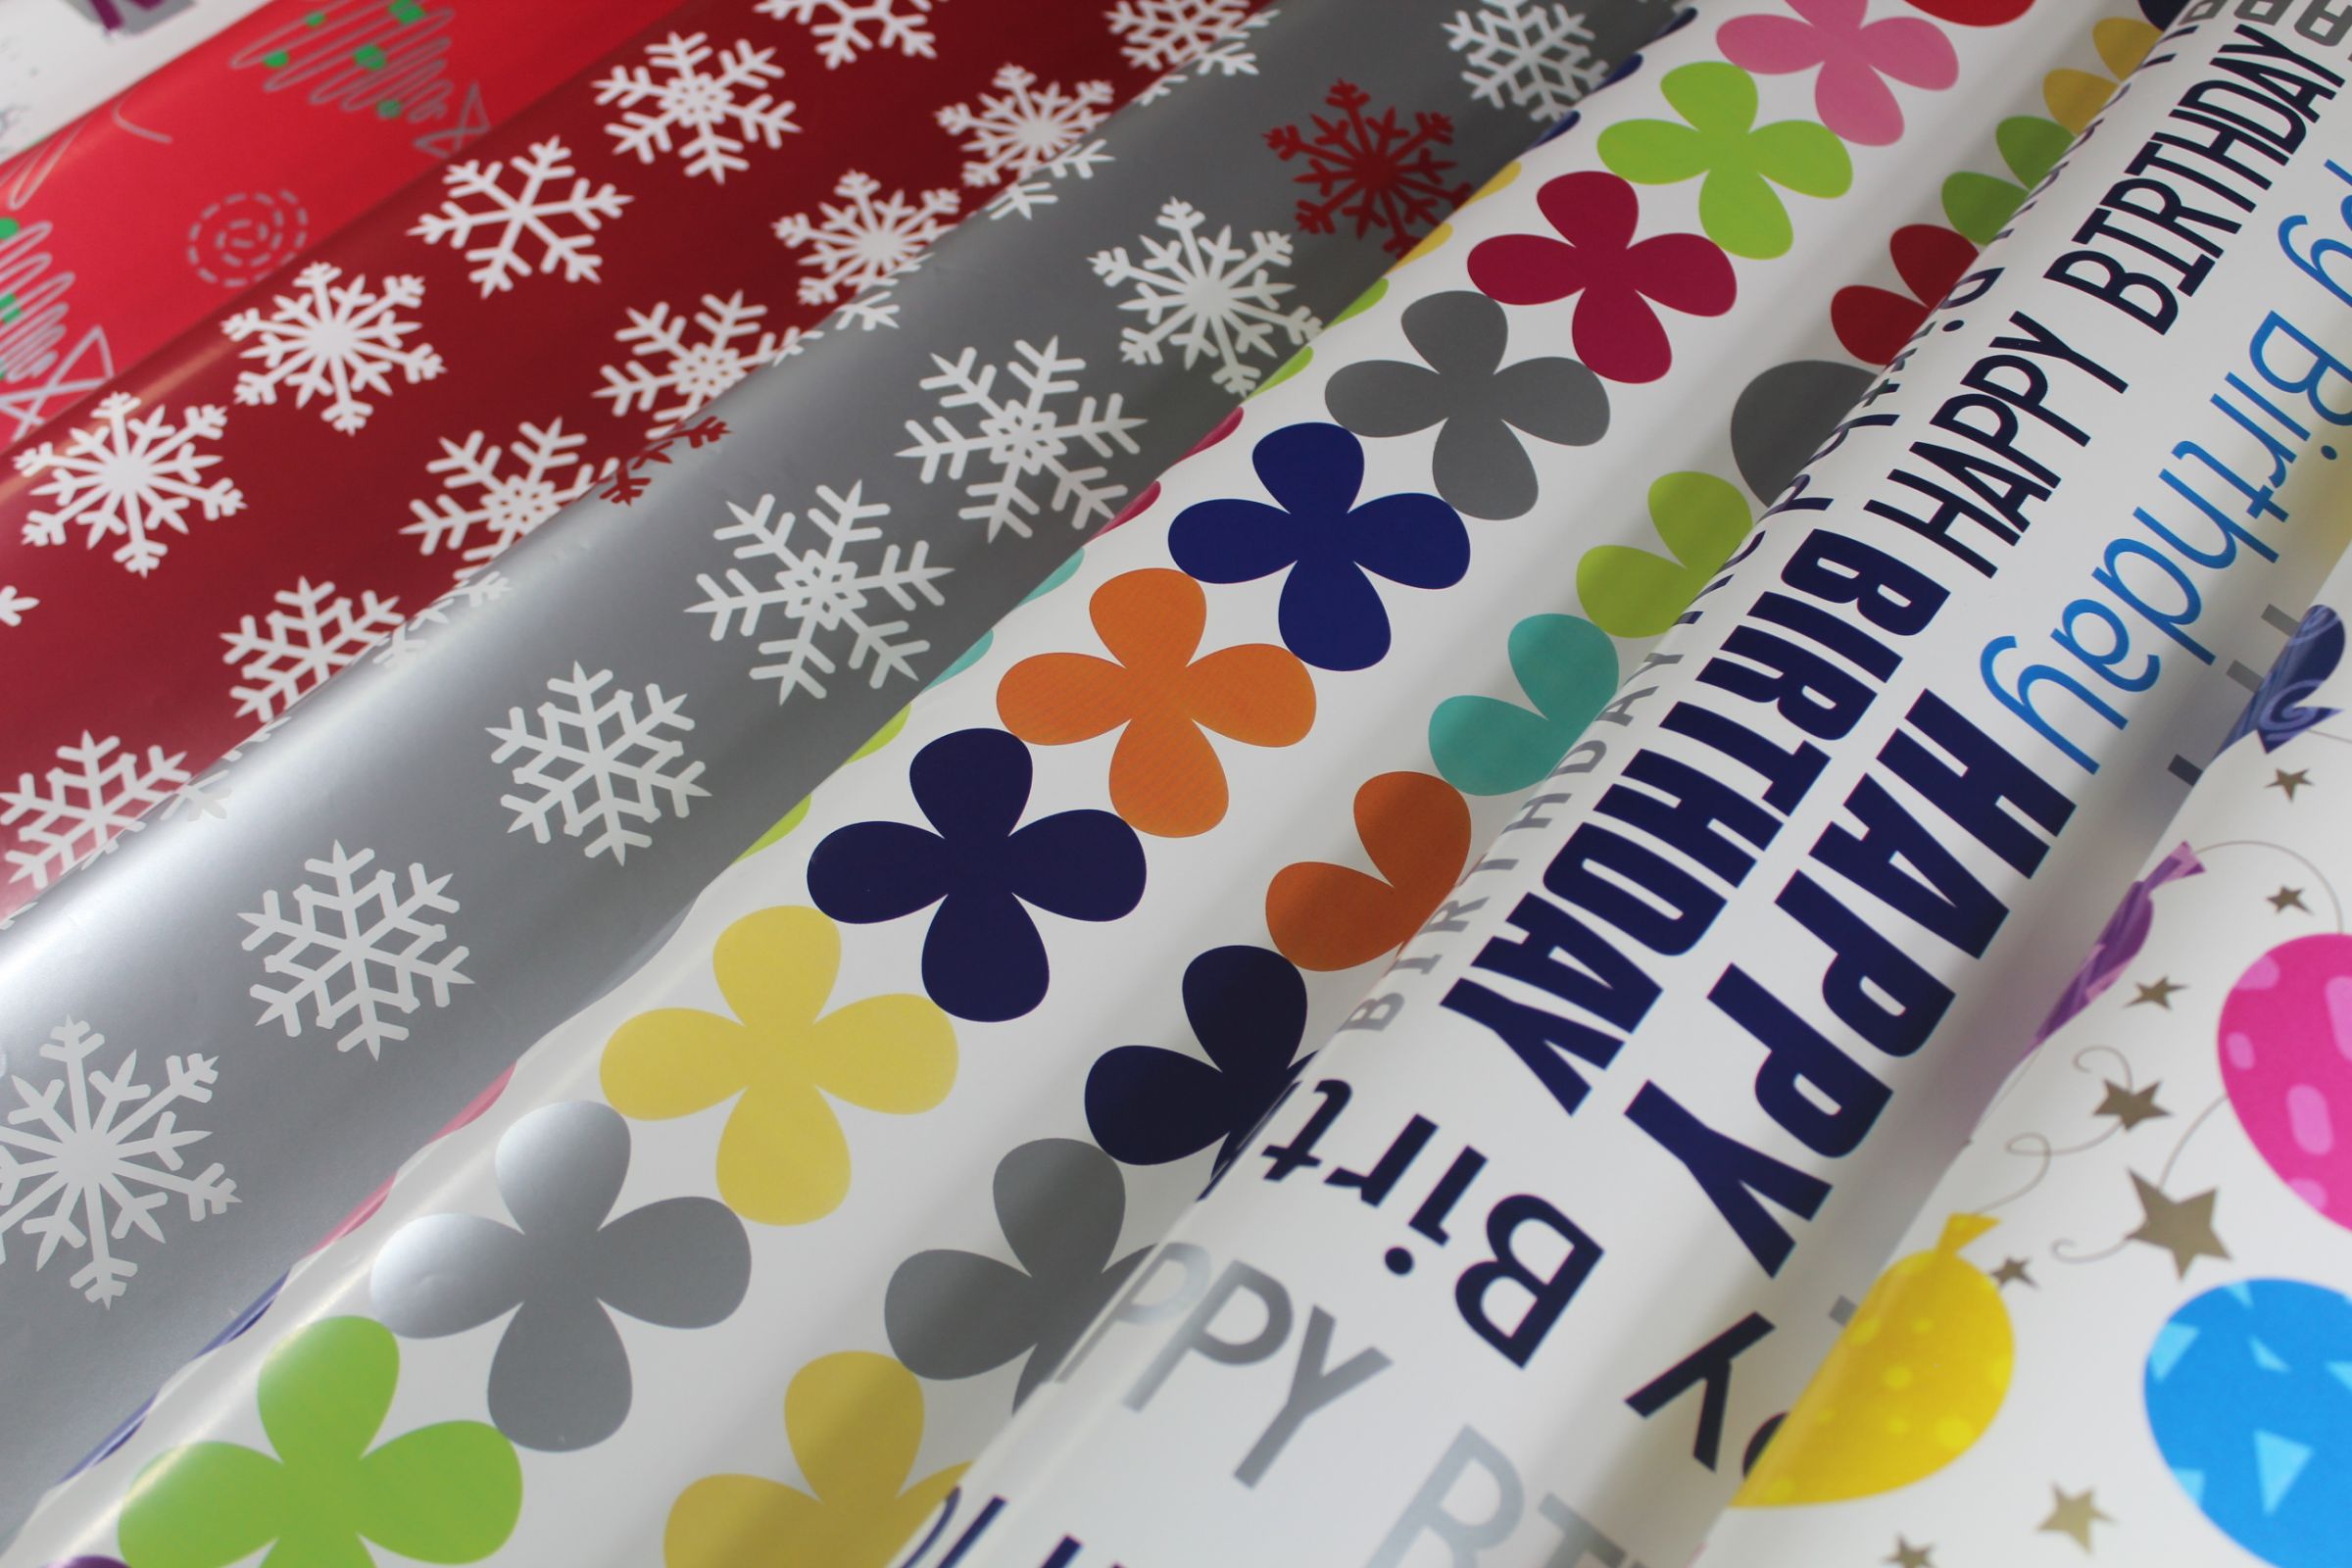 80gram art gift wrapping paper printed with everyday designs for presents wrapping for all occasions.